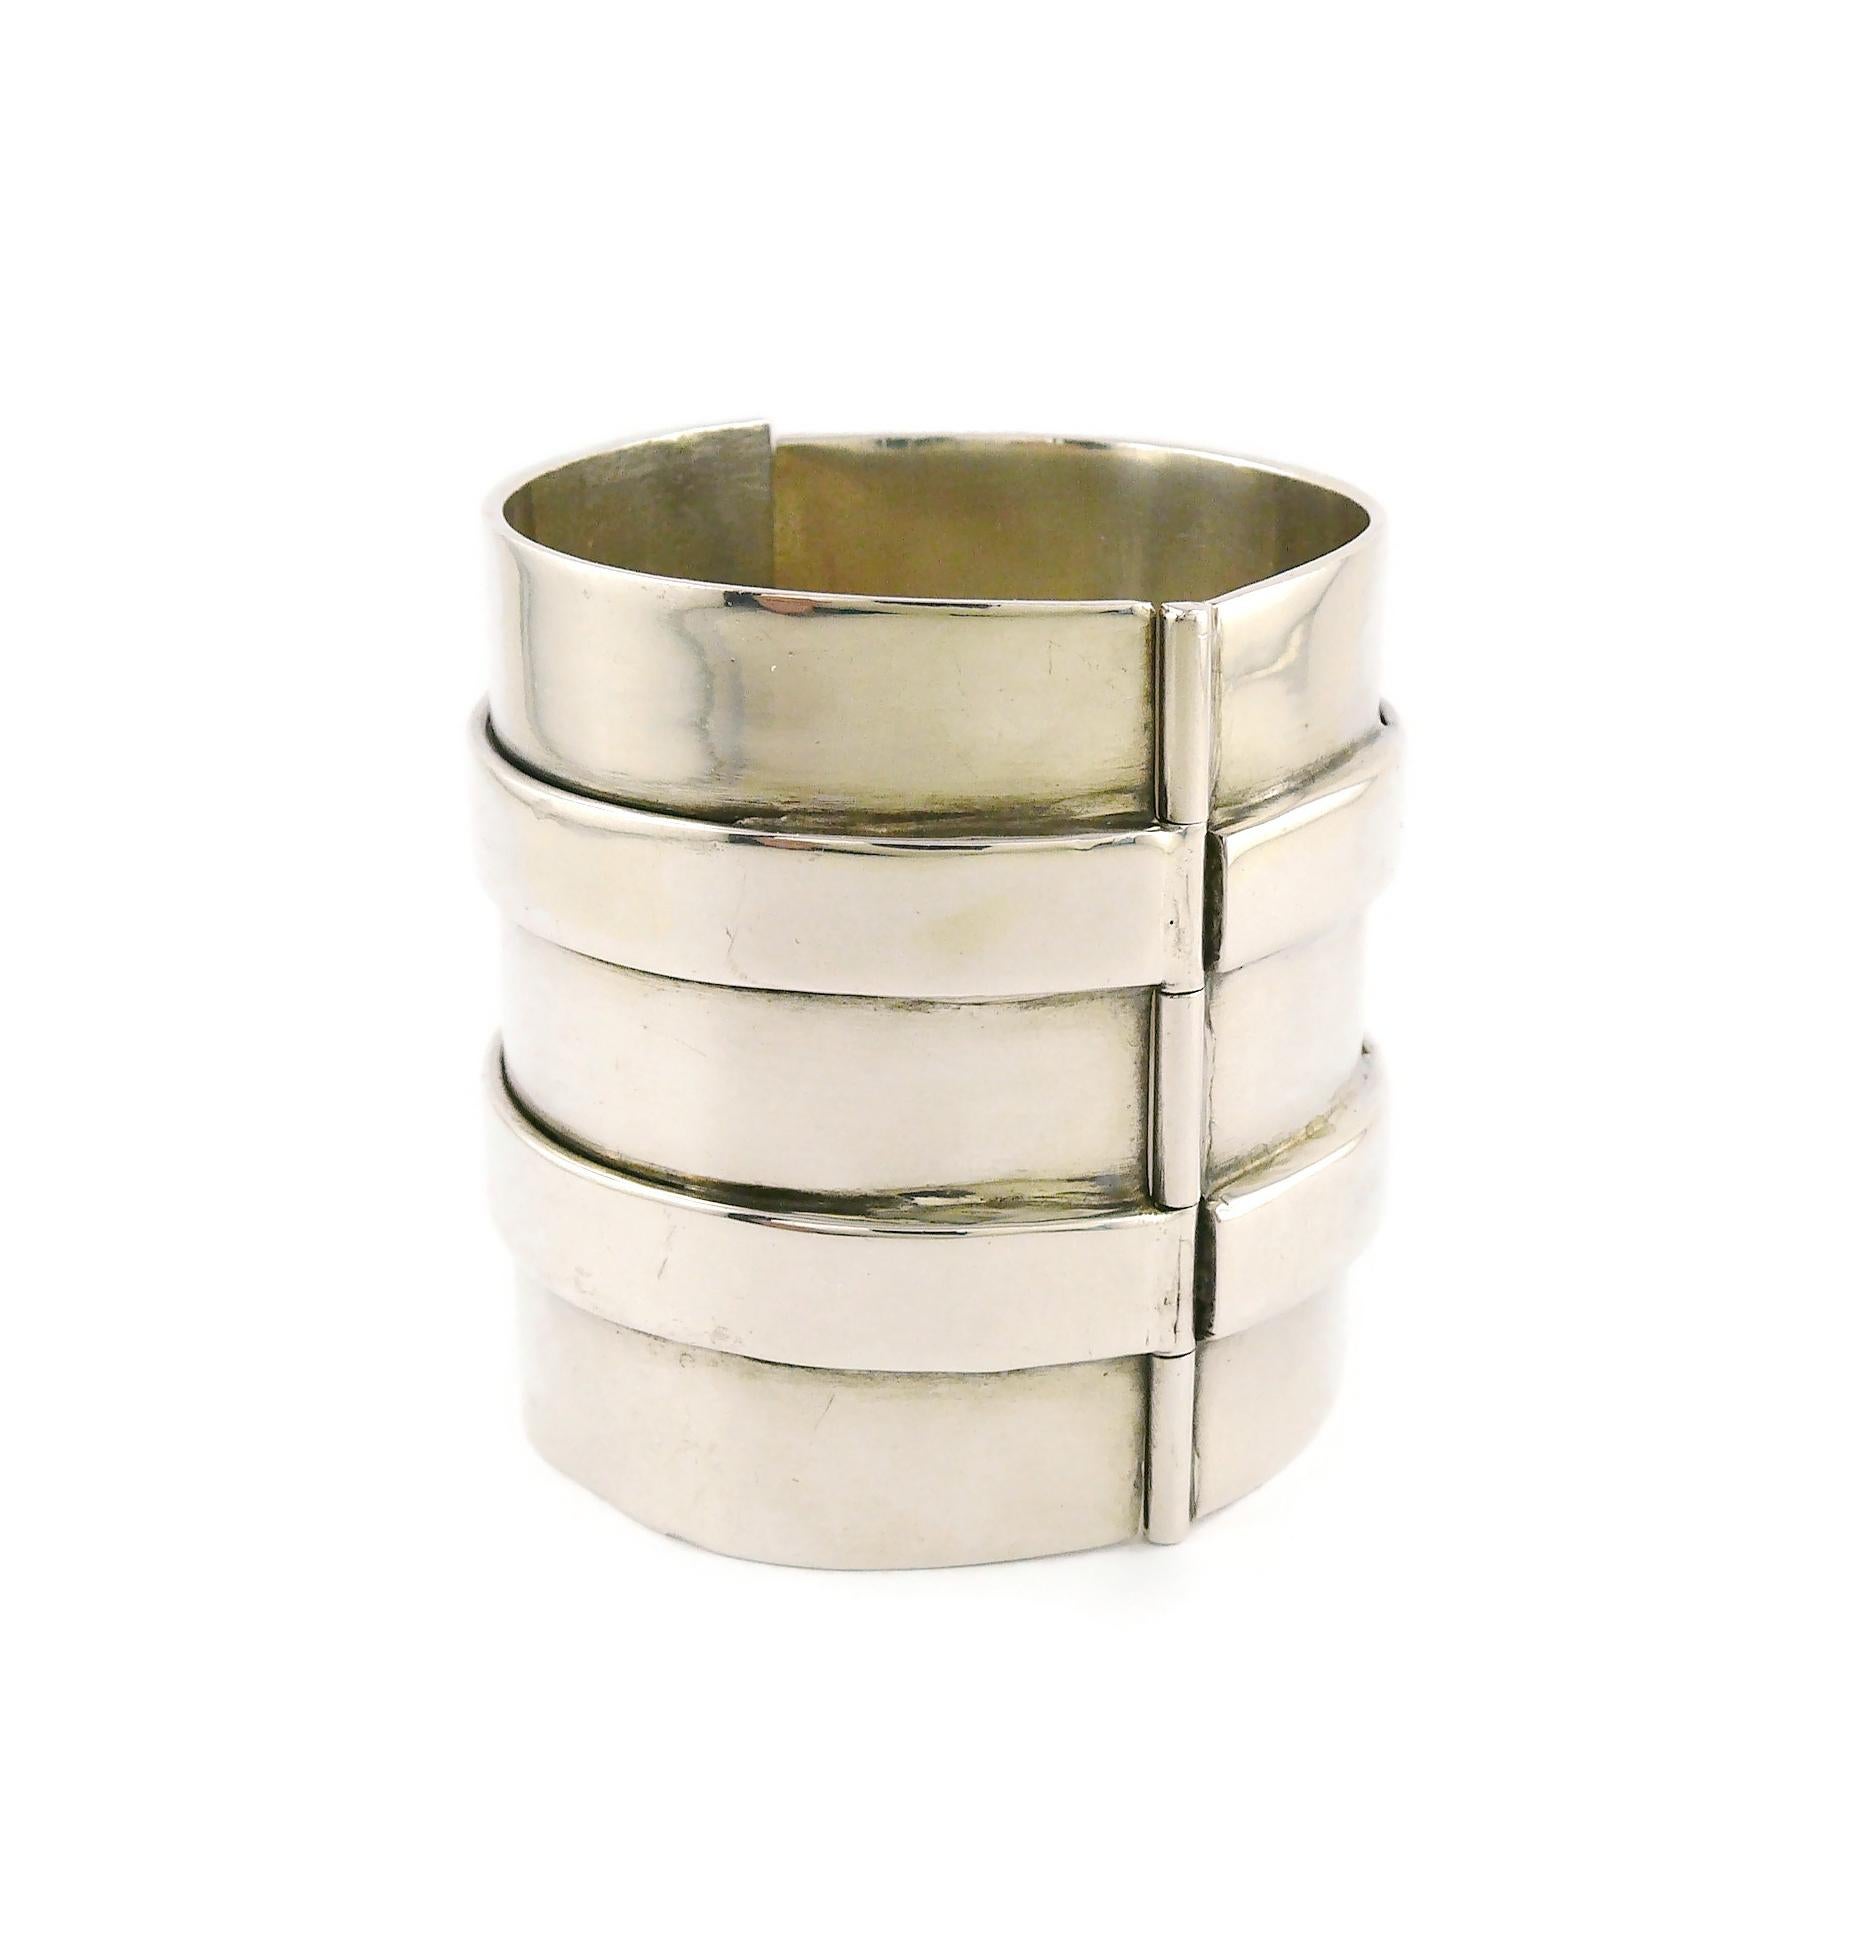 Jean Paul Gaultier Vintage Silver Toned Wide Cuff Bracelet with Buckle Details In Good Condition For Sale In Nice, FR